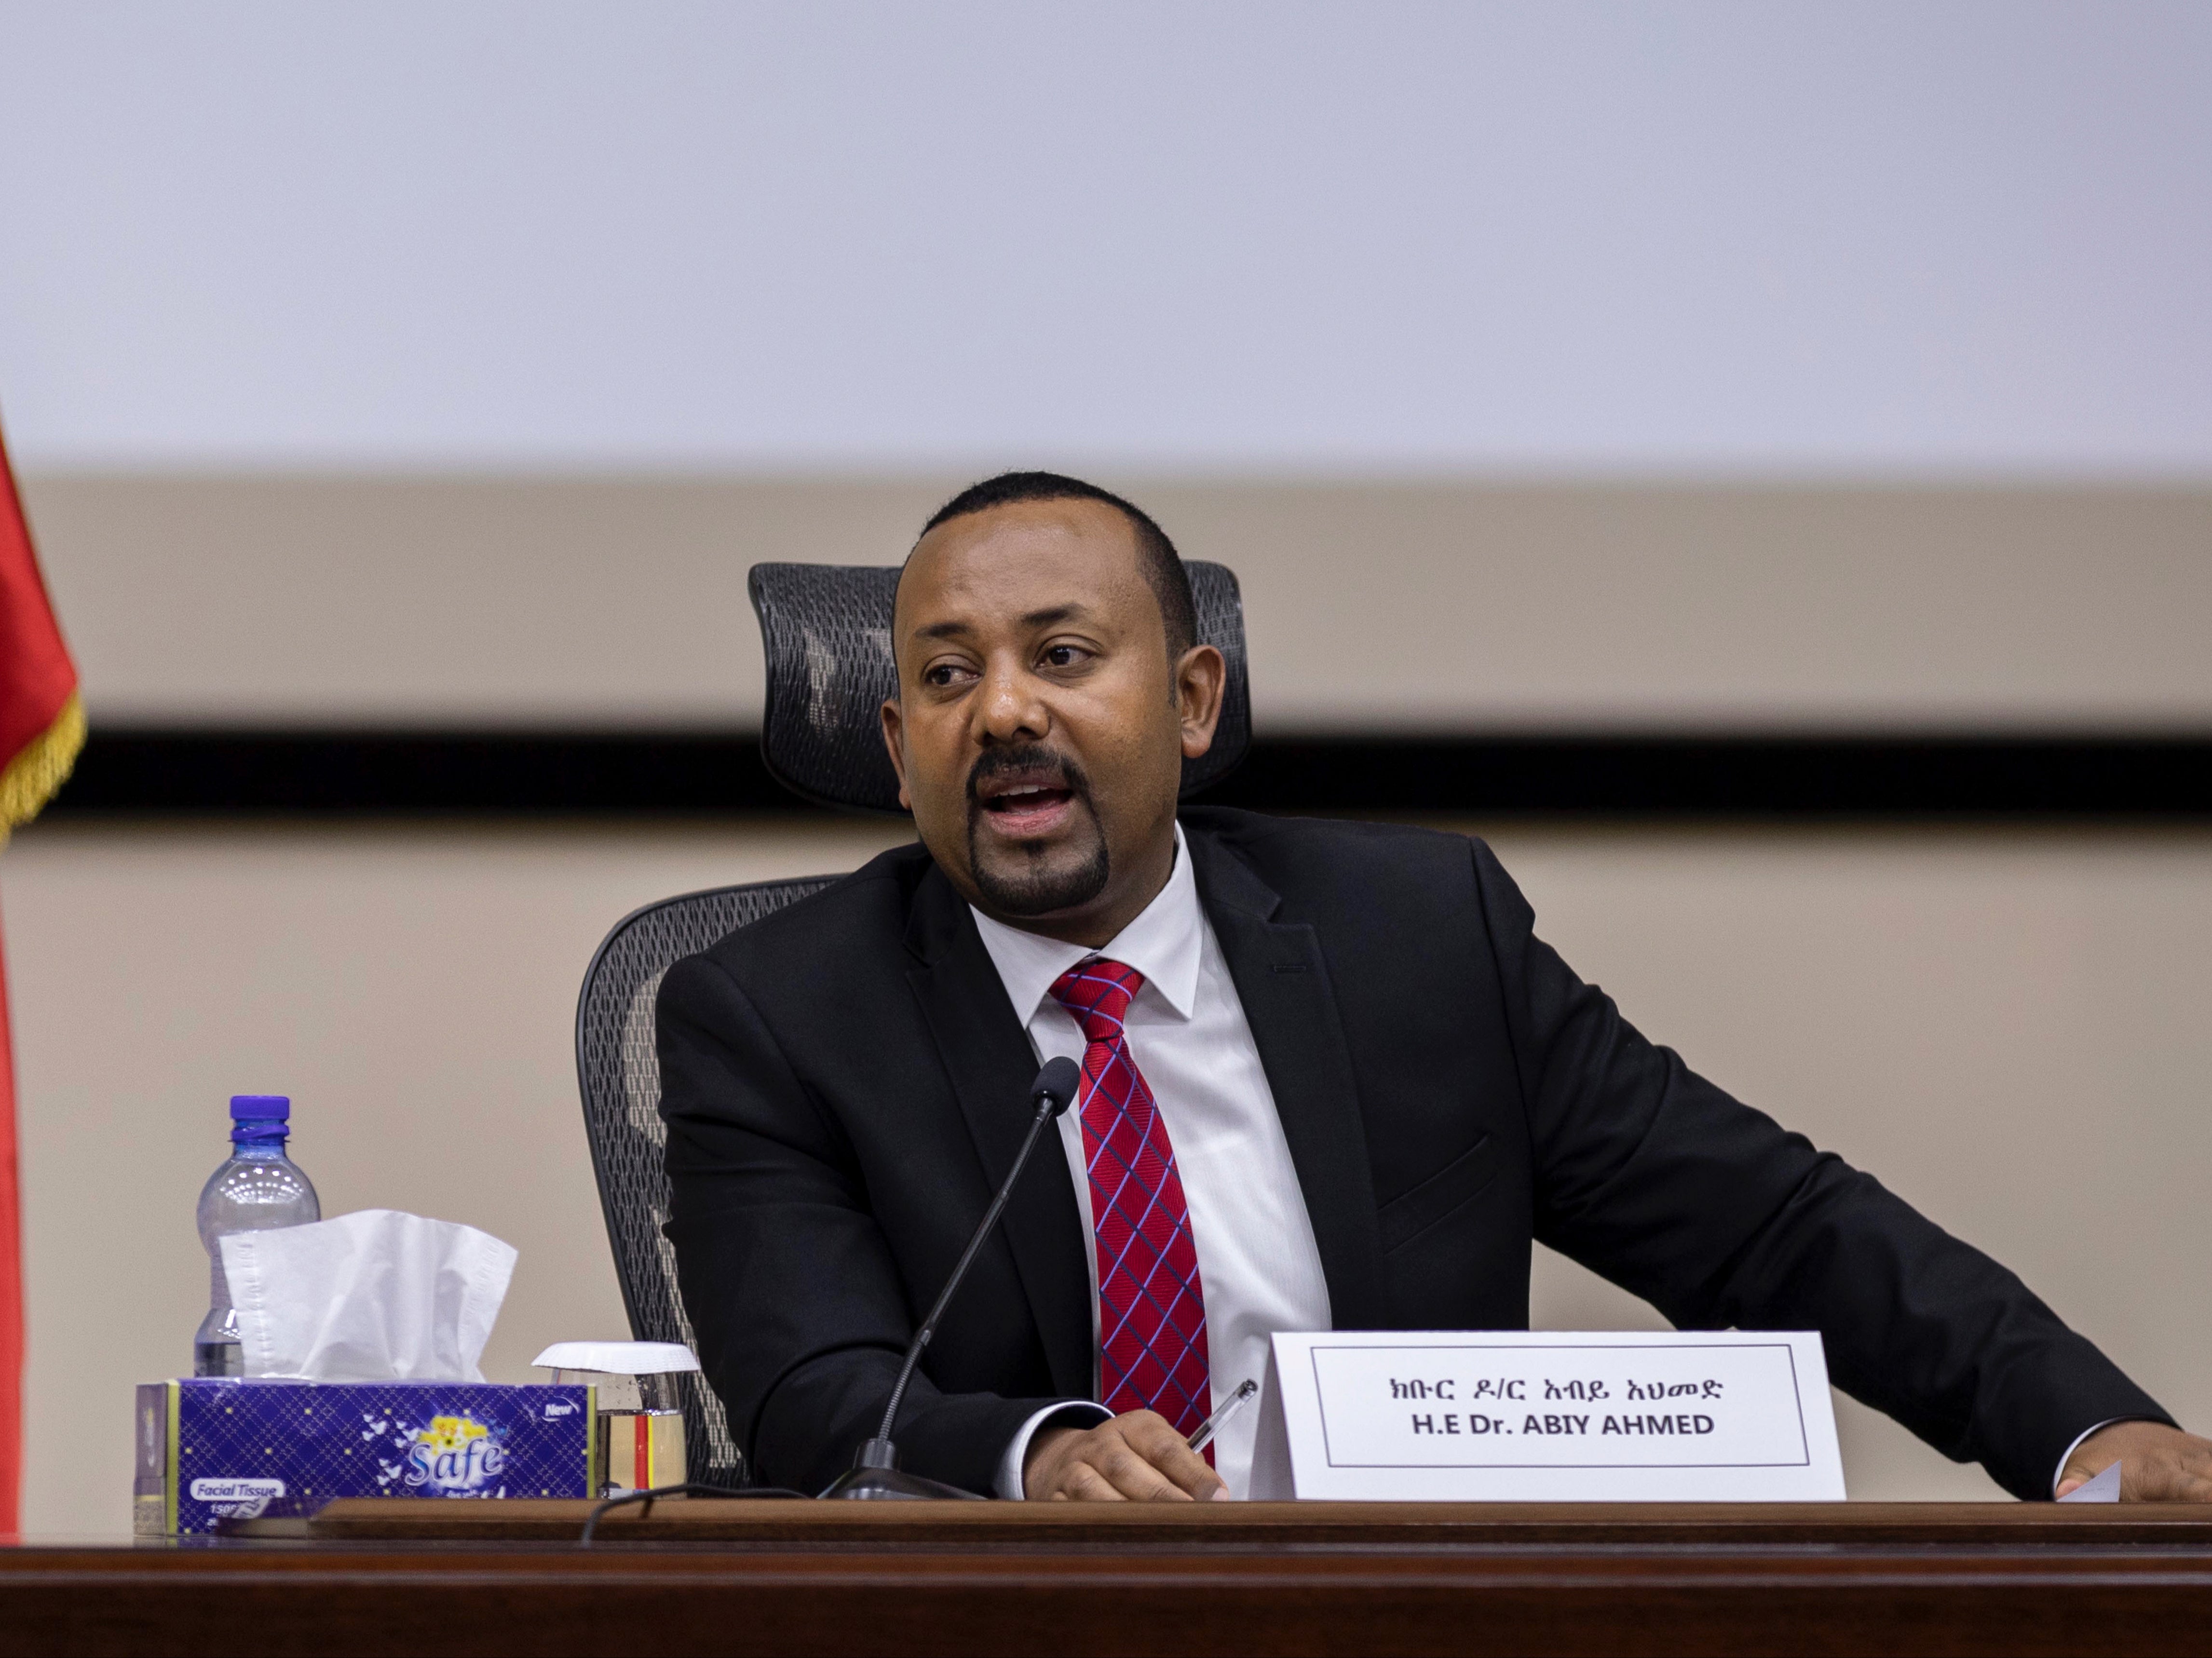 Ethiopia’s prime minister, Abiy Ahmed, has urged national unity among more than 80 ethnic groups in the country